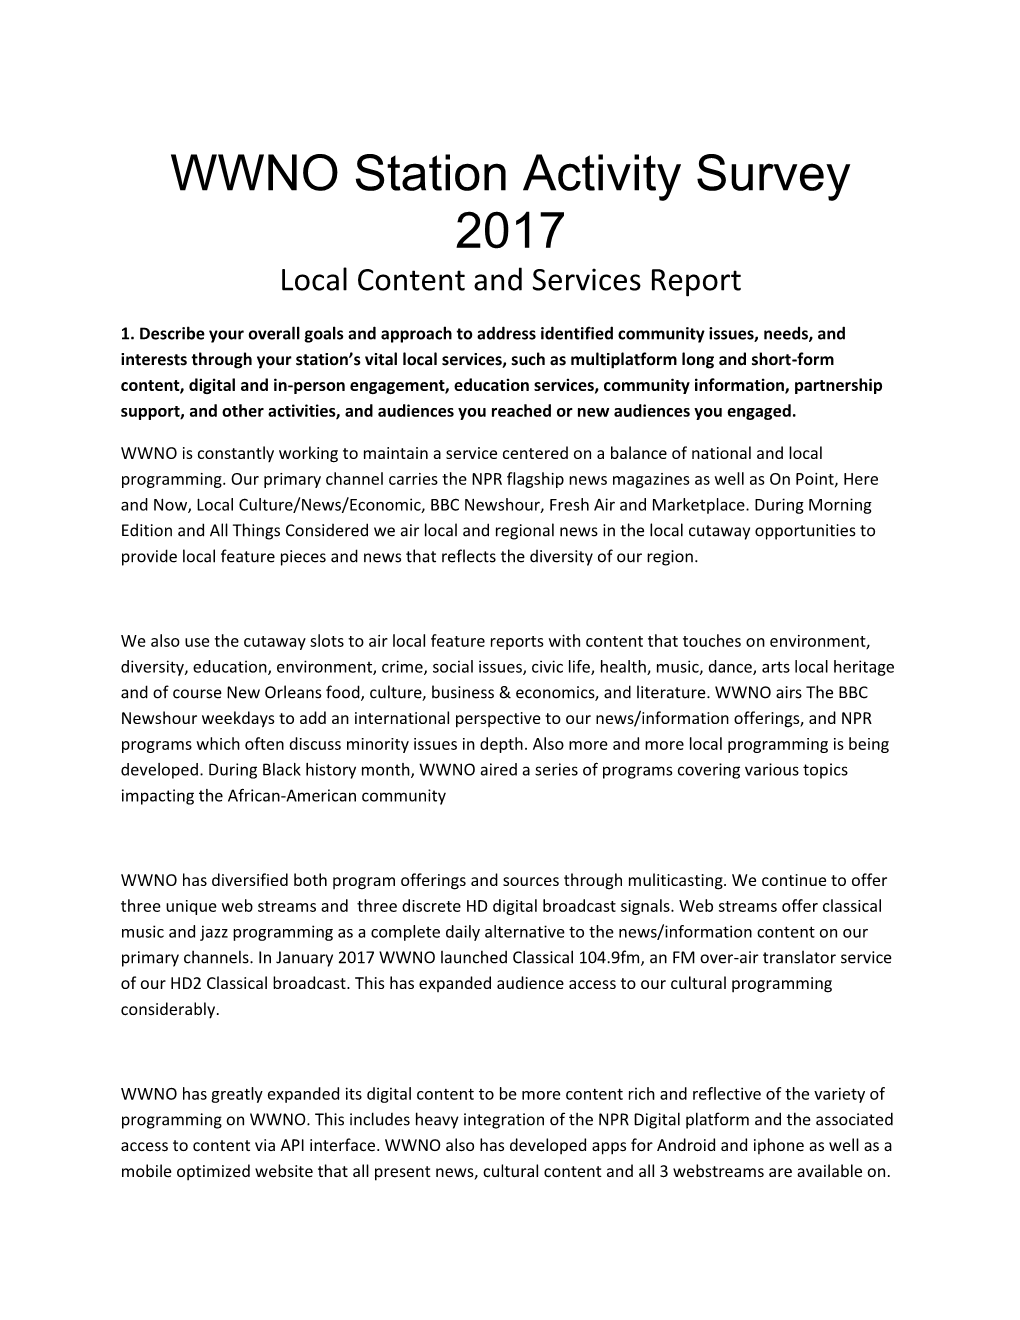 WWNO Station Activity Survey 2017 Local Content and Services Report